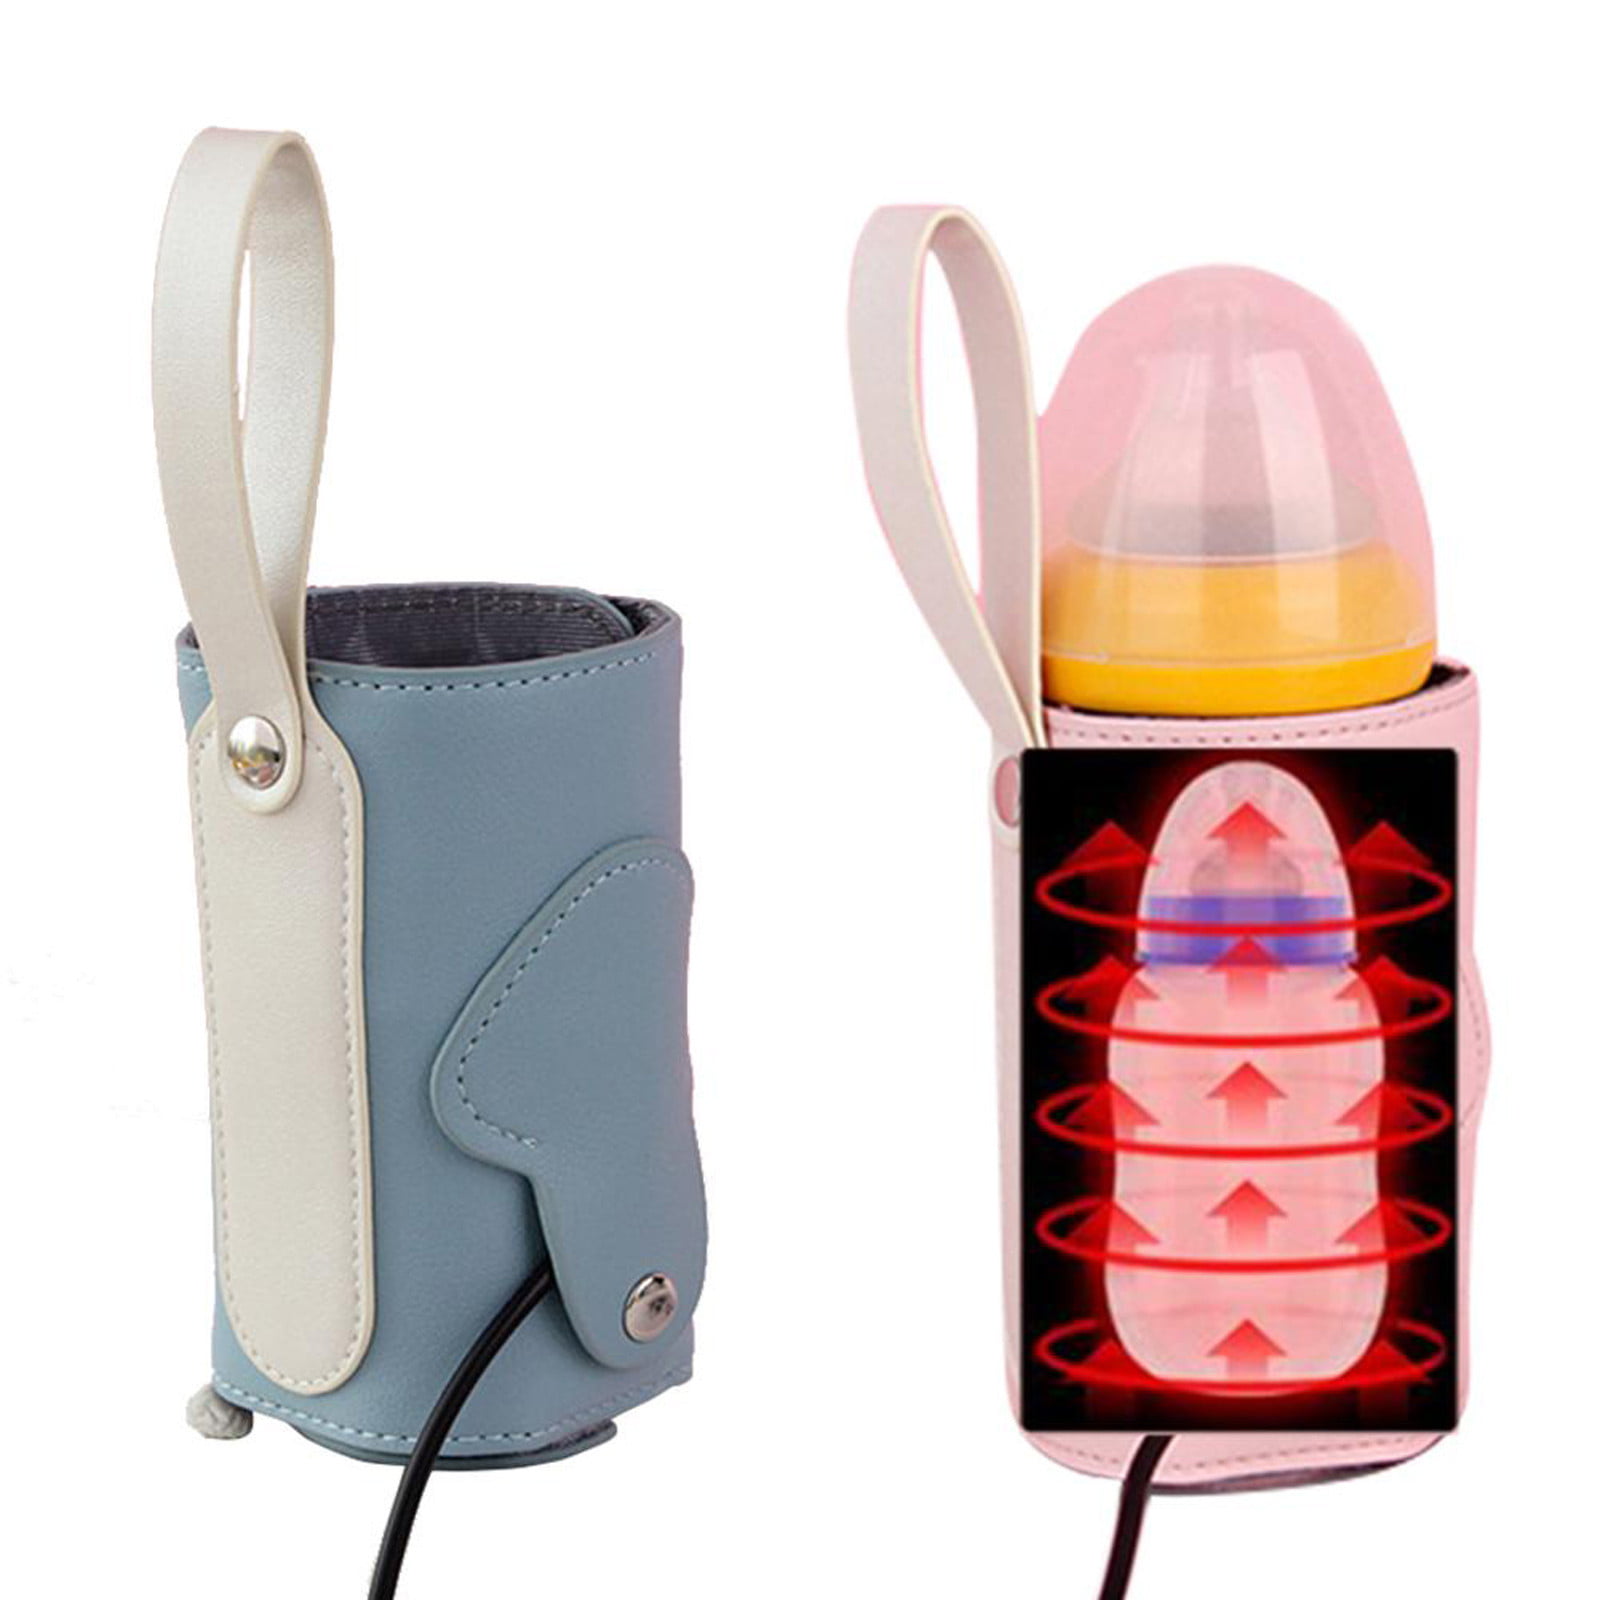 Baby Bottle Warmer Milk Food Portable Heater use it home and car 5V USB Charger 